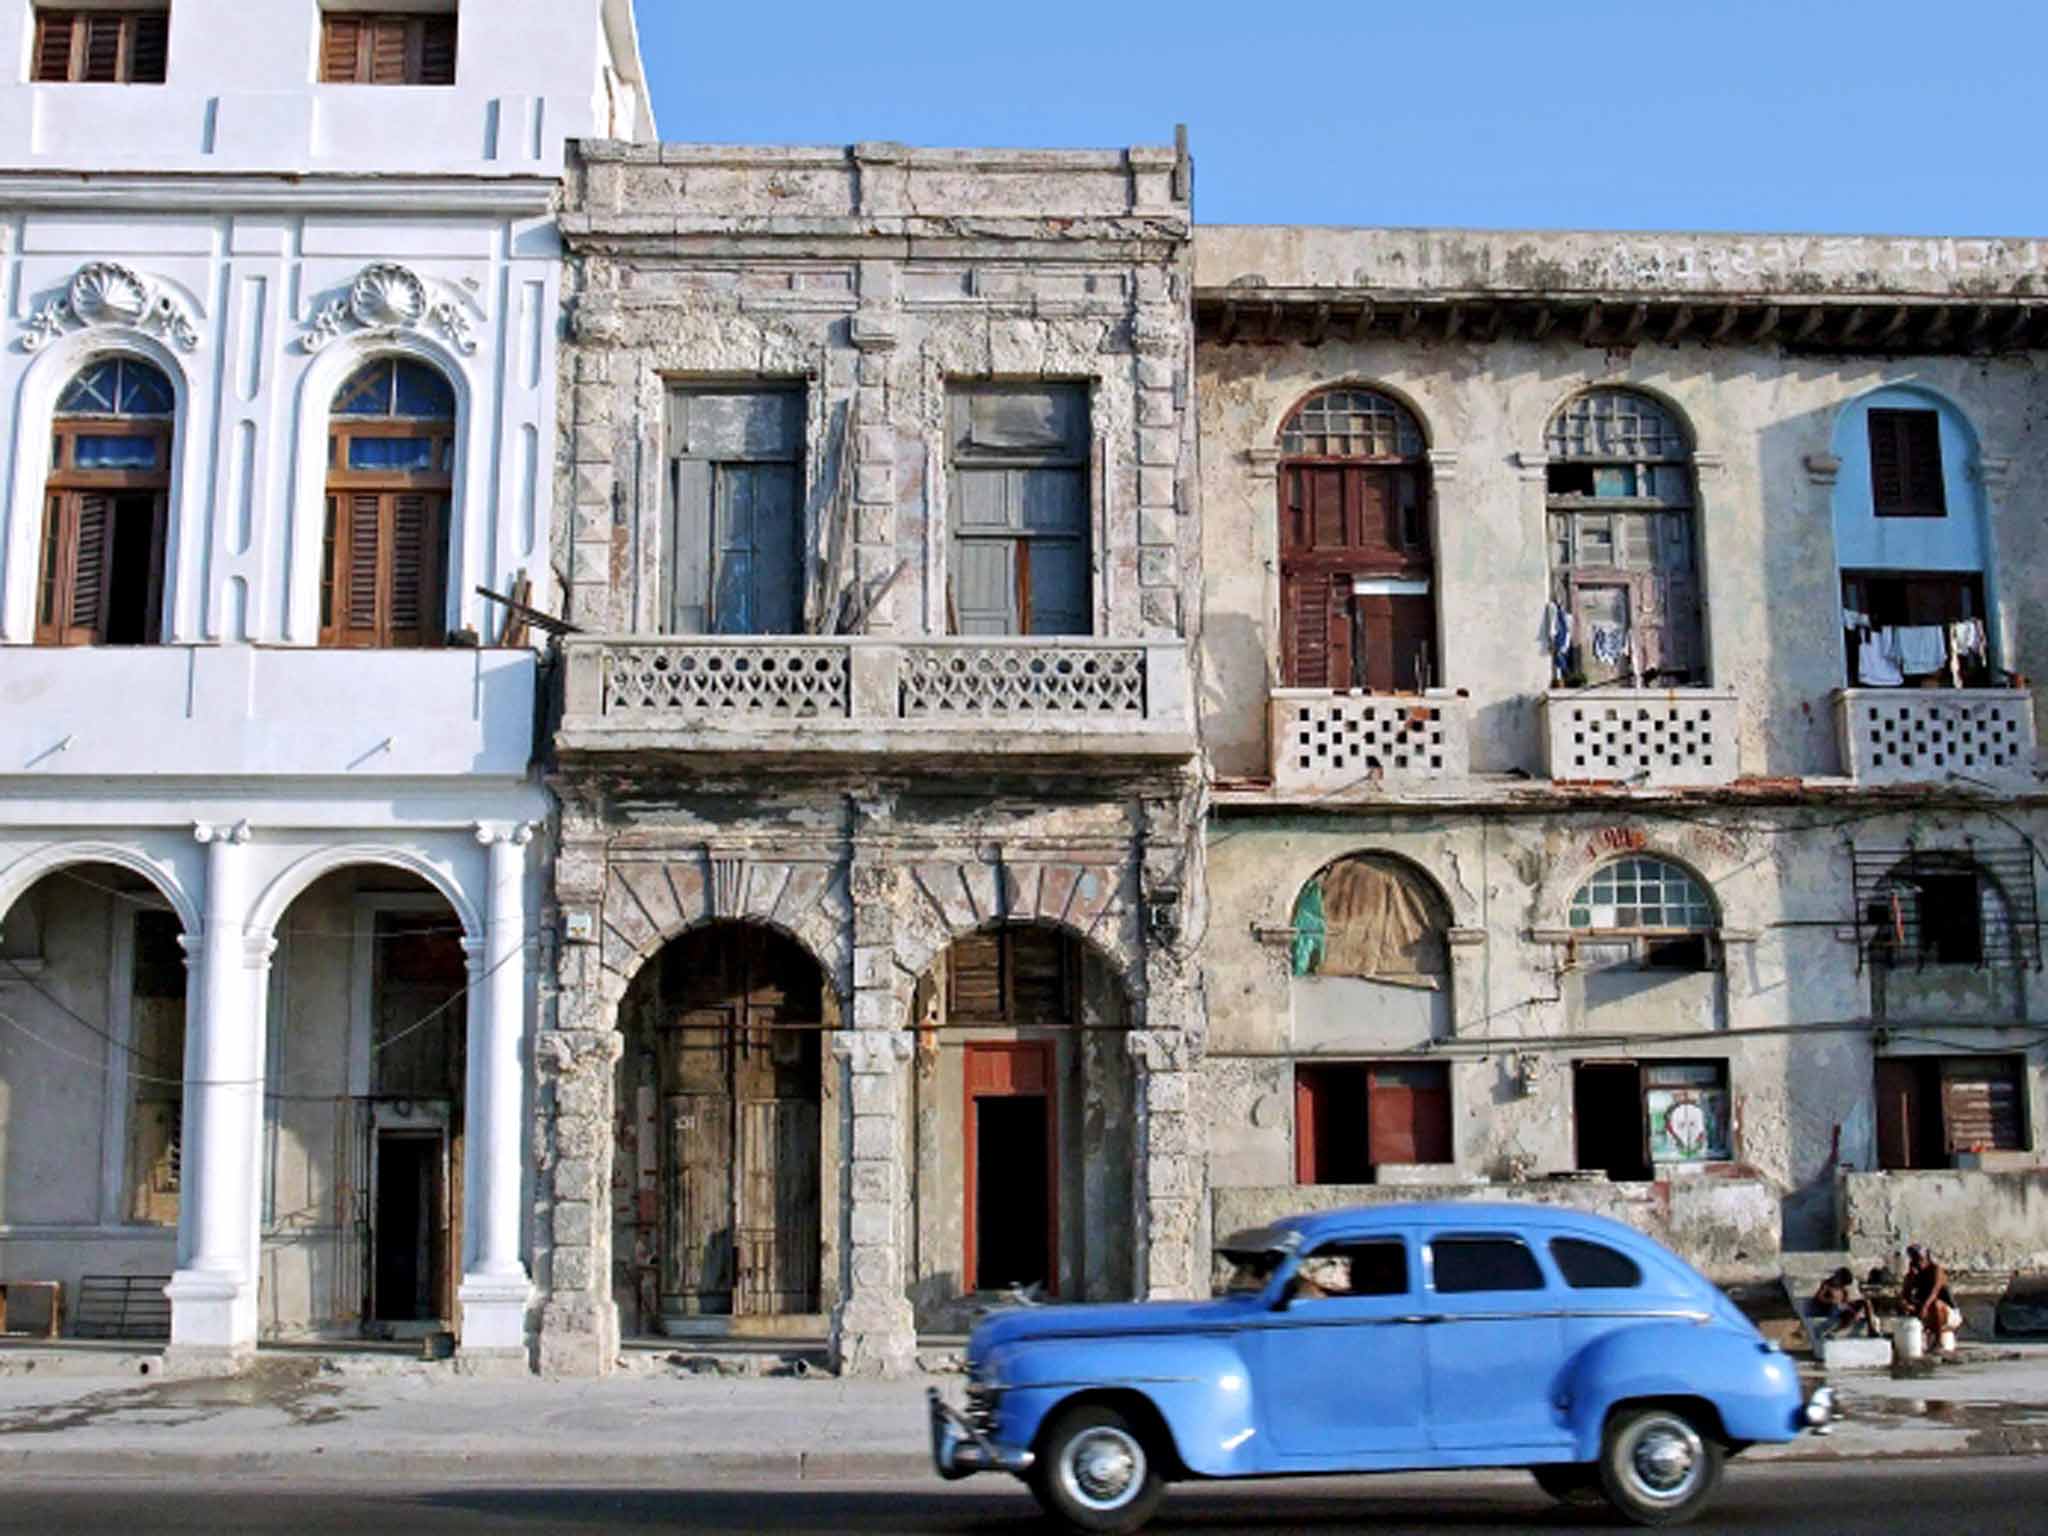 Economy drive: Cuba may soon be changing